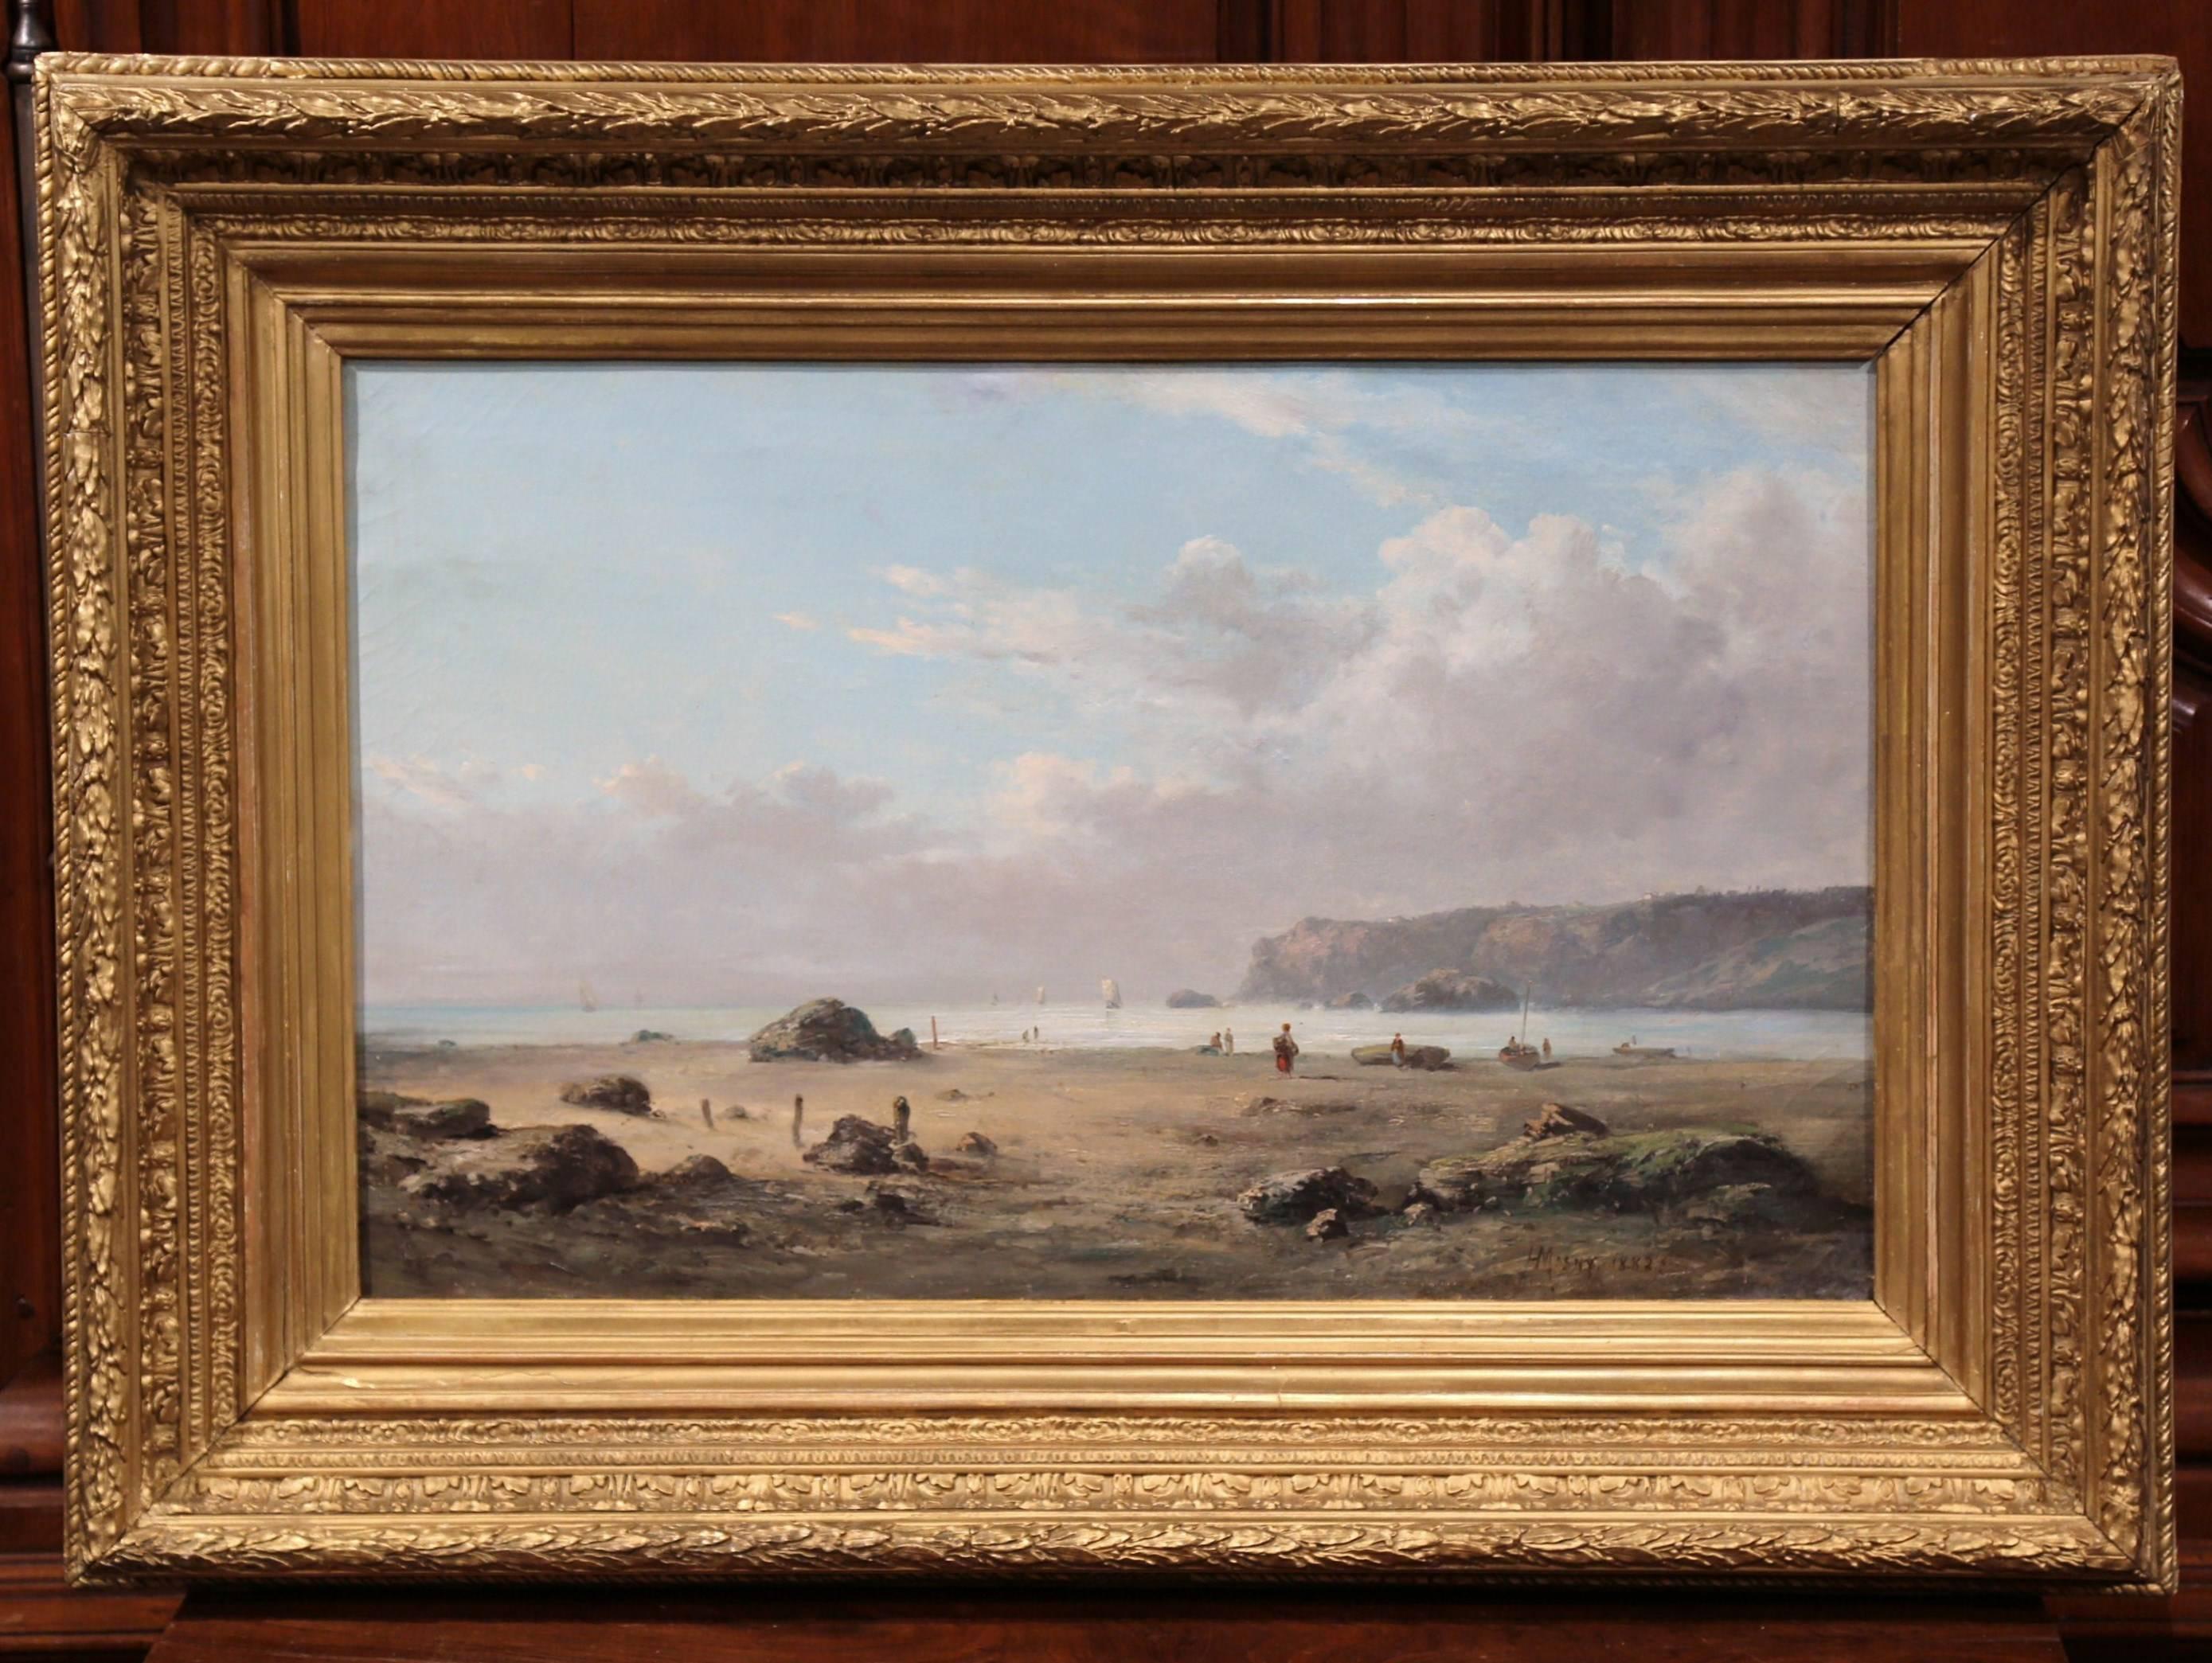 19th Century French Brittany Coast Landscape Painting Signed Masny Dated 1882 For Sale 1